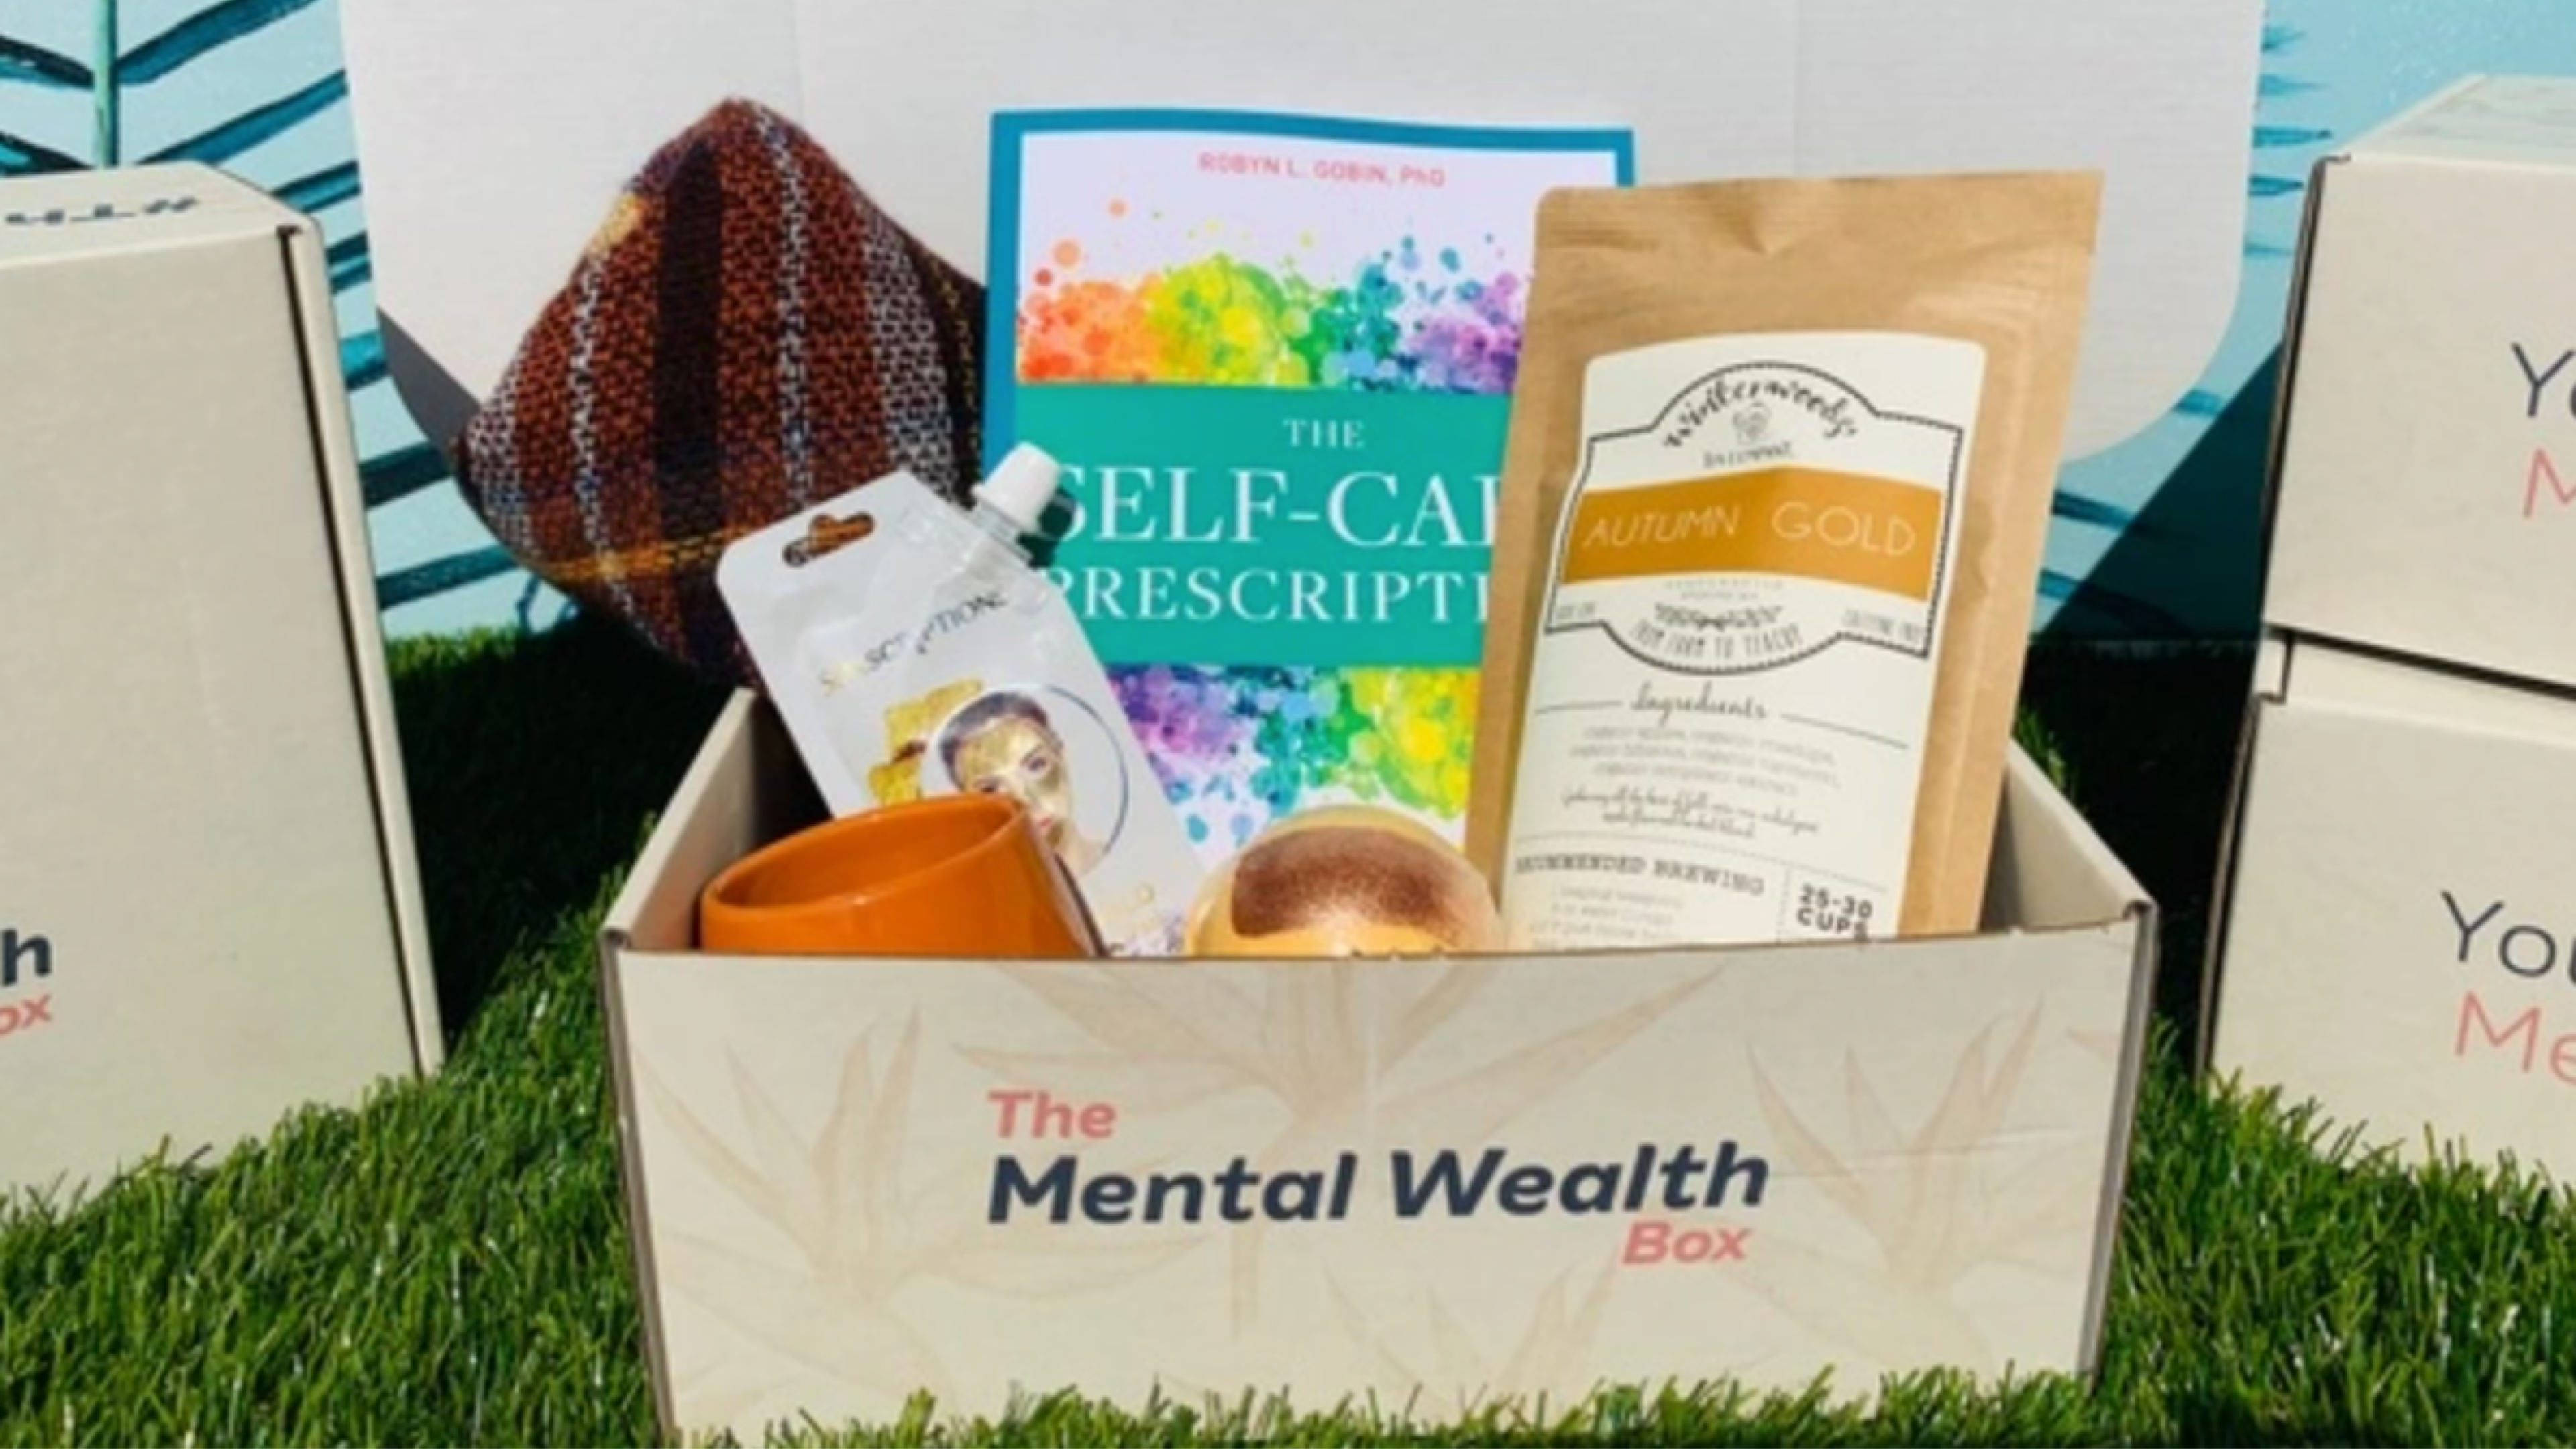 mental health subscription box to provide resources for those suffering from PTSD, anxiety, or depression